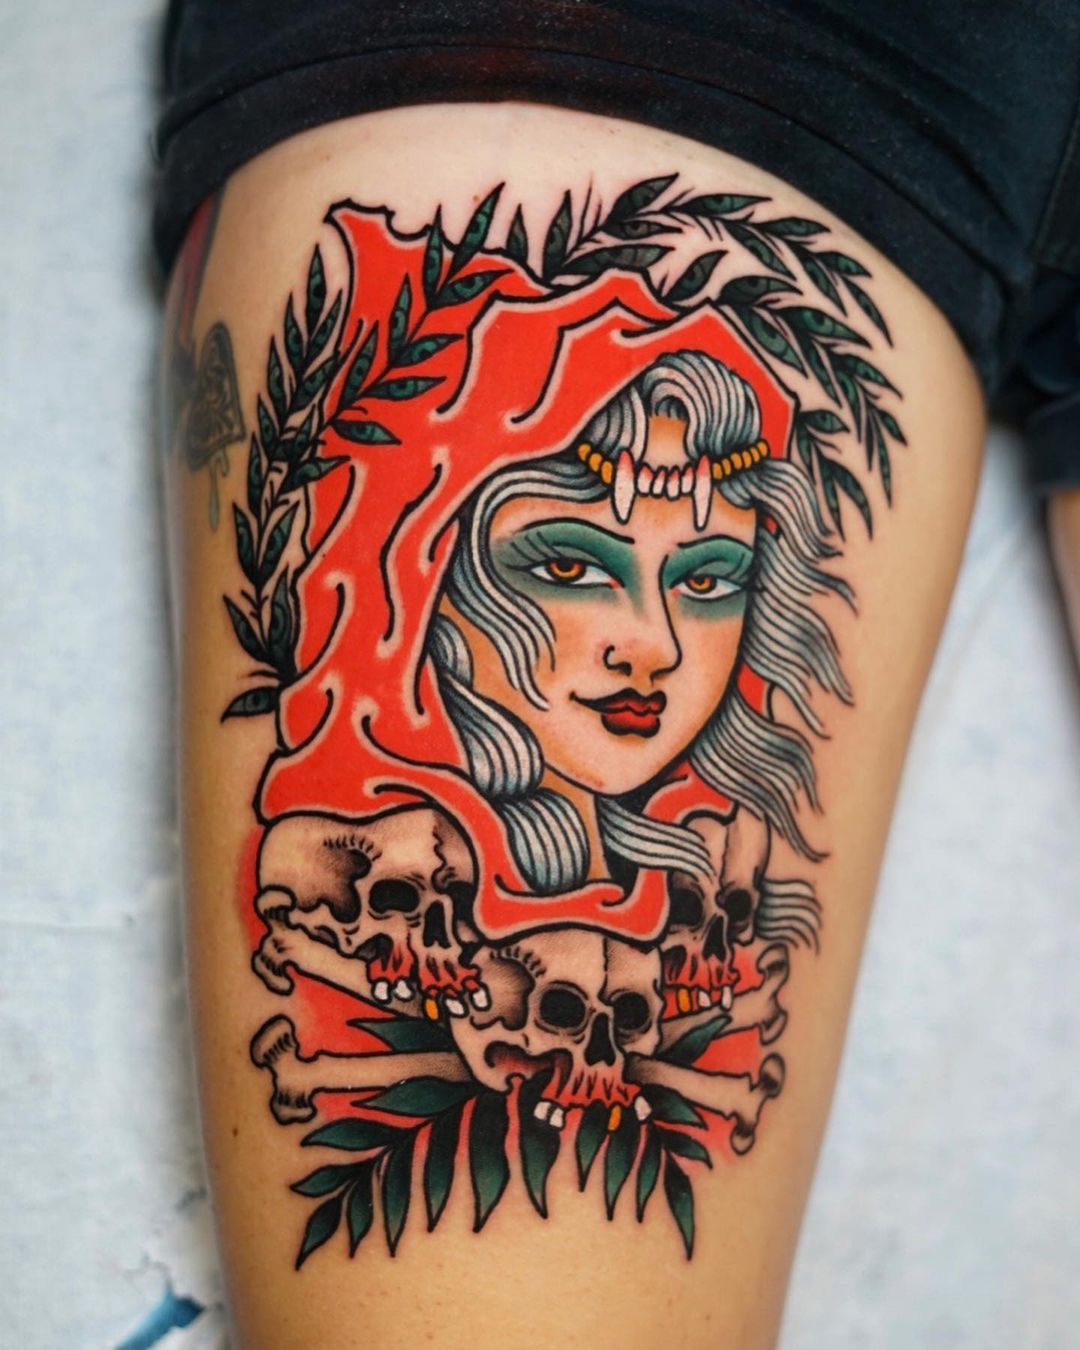 Little Red Riding hood Tattoo by theirison on DeviantArt